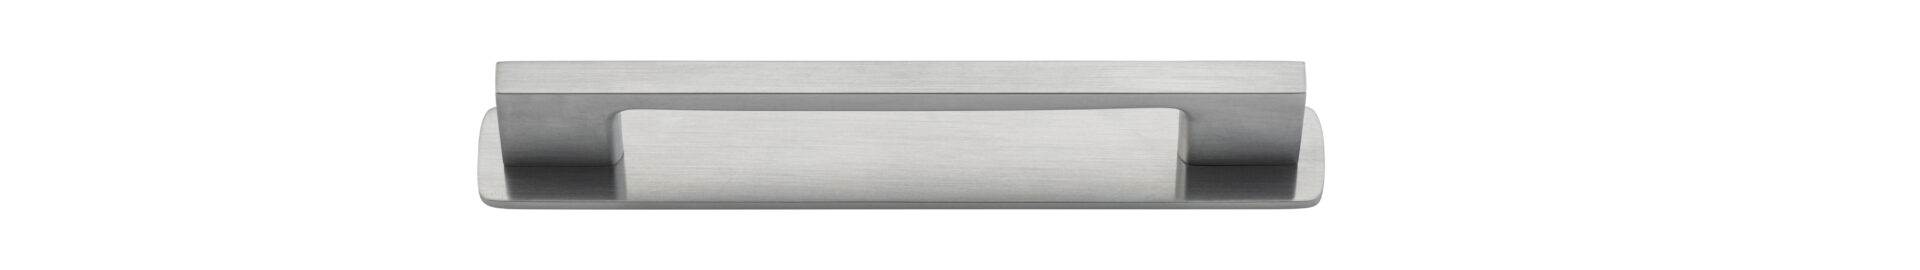 0535B - Cali Cabinet Pull with Backplate - CTC 128mm - Brushed Chrome